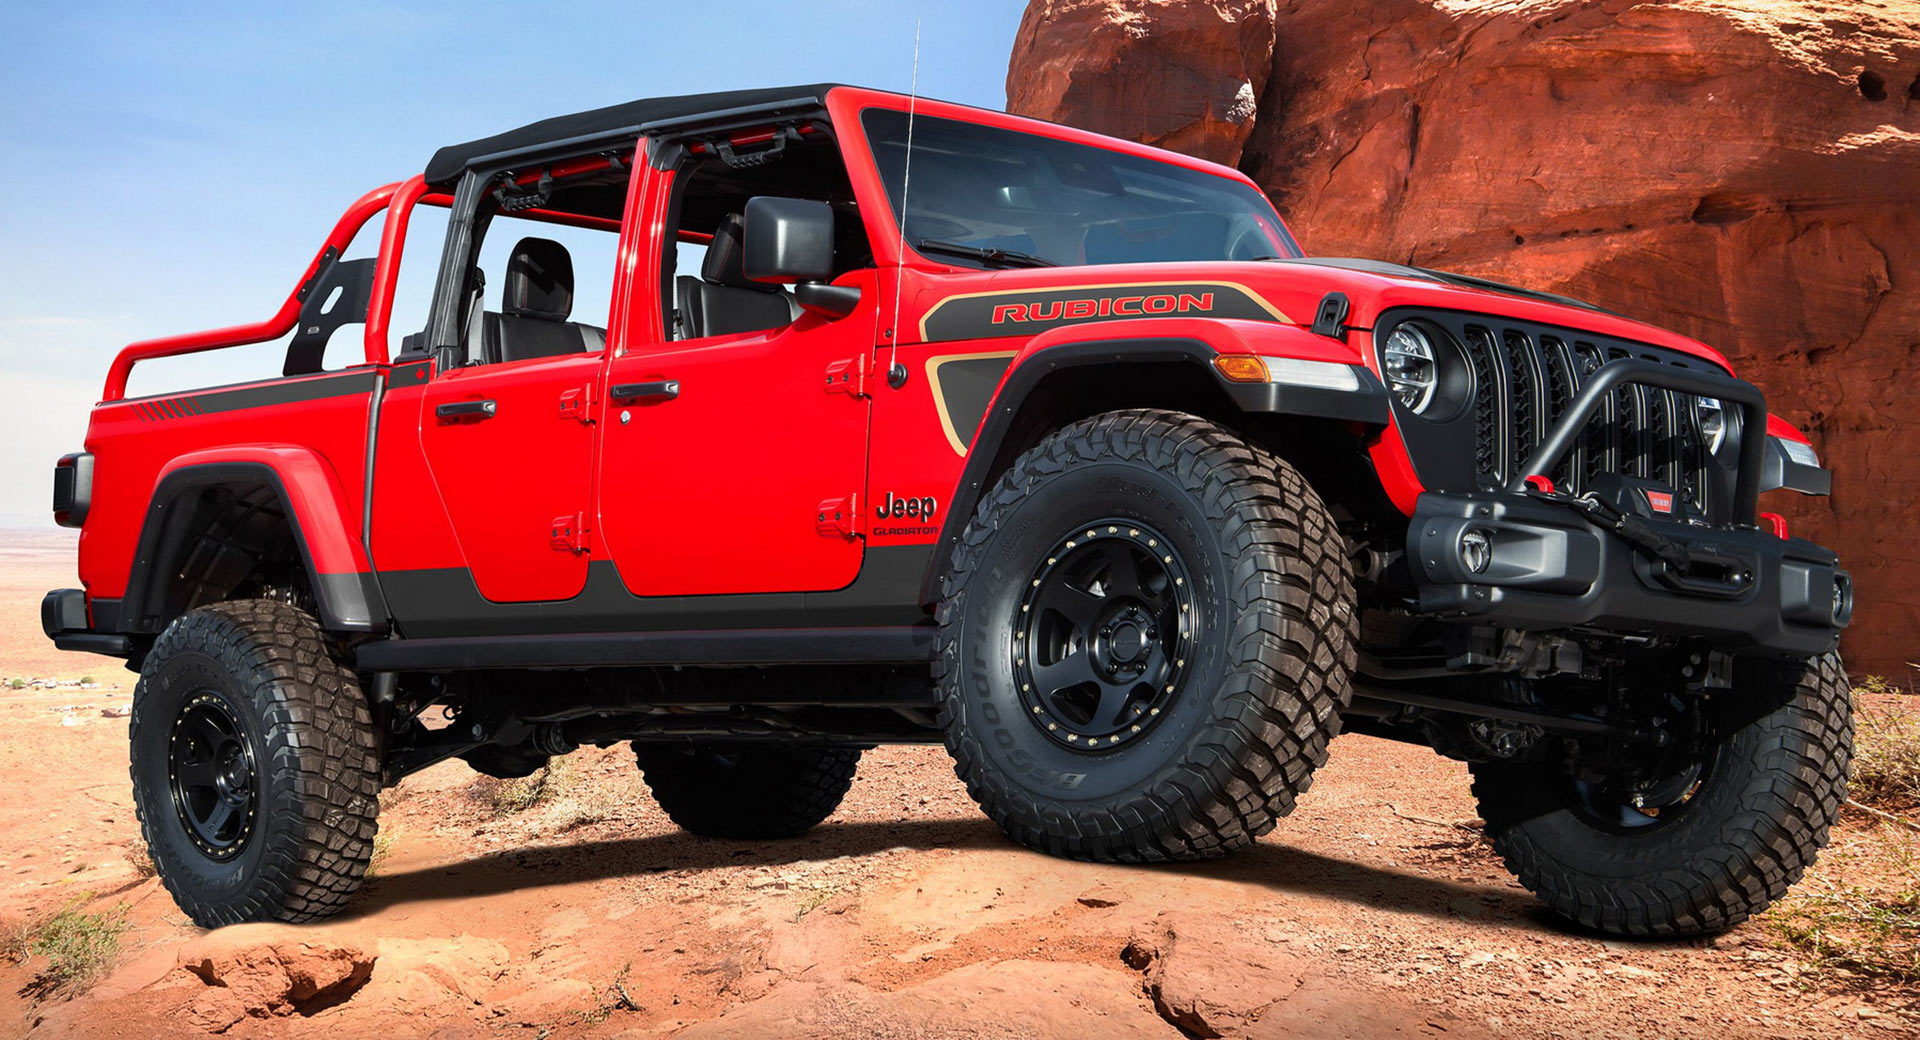 The Jeep Gladiator Is Now Available With Half-Doors | Carscoops